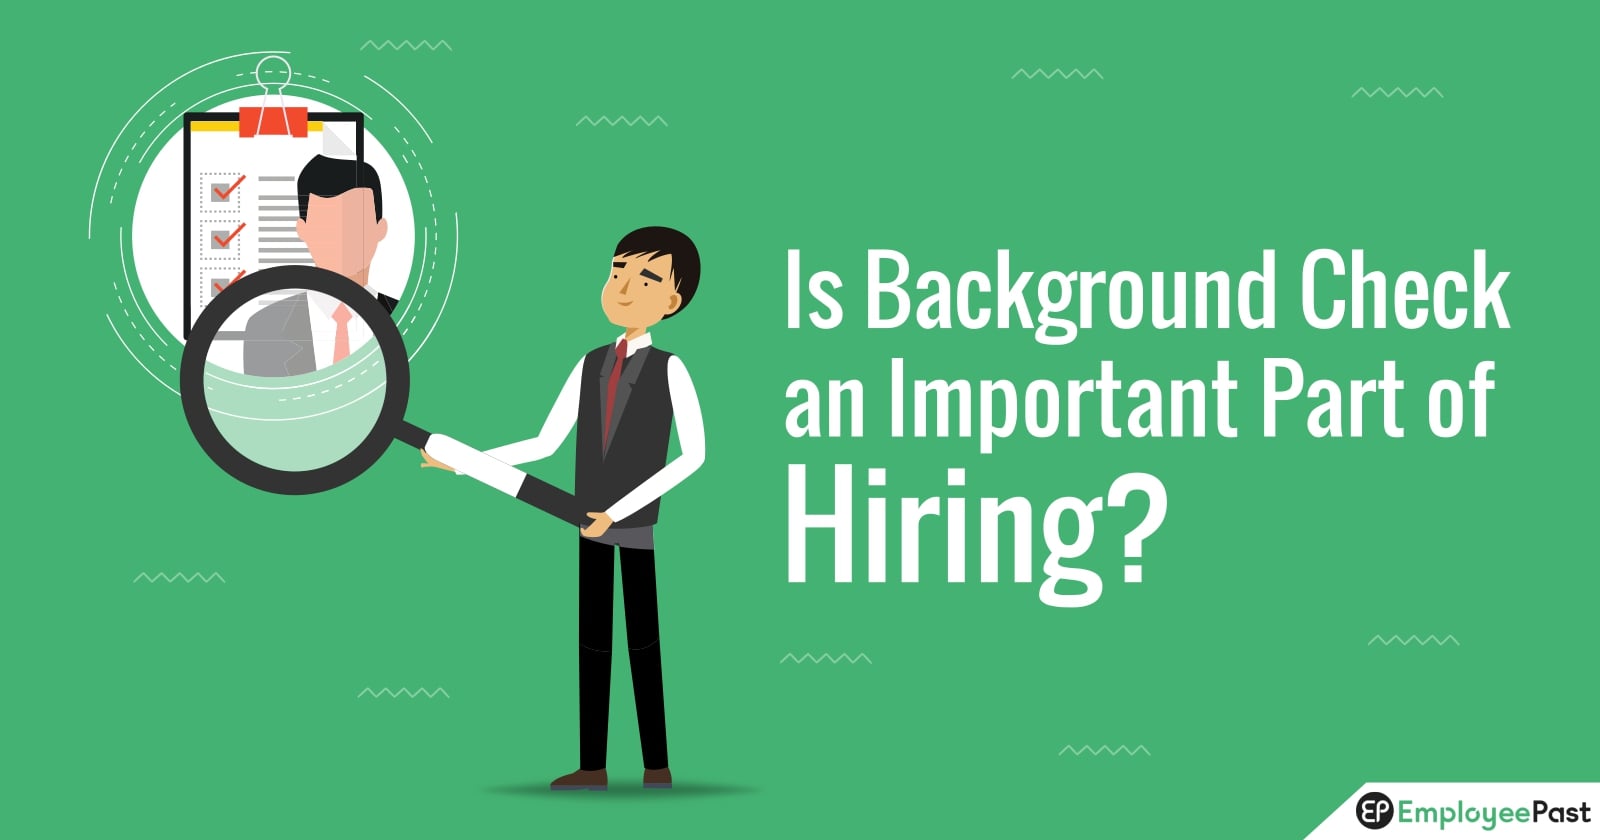 Is Background Check an Important Part of Hiring?